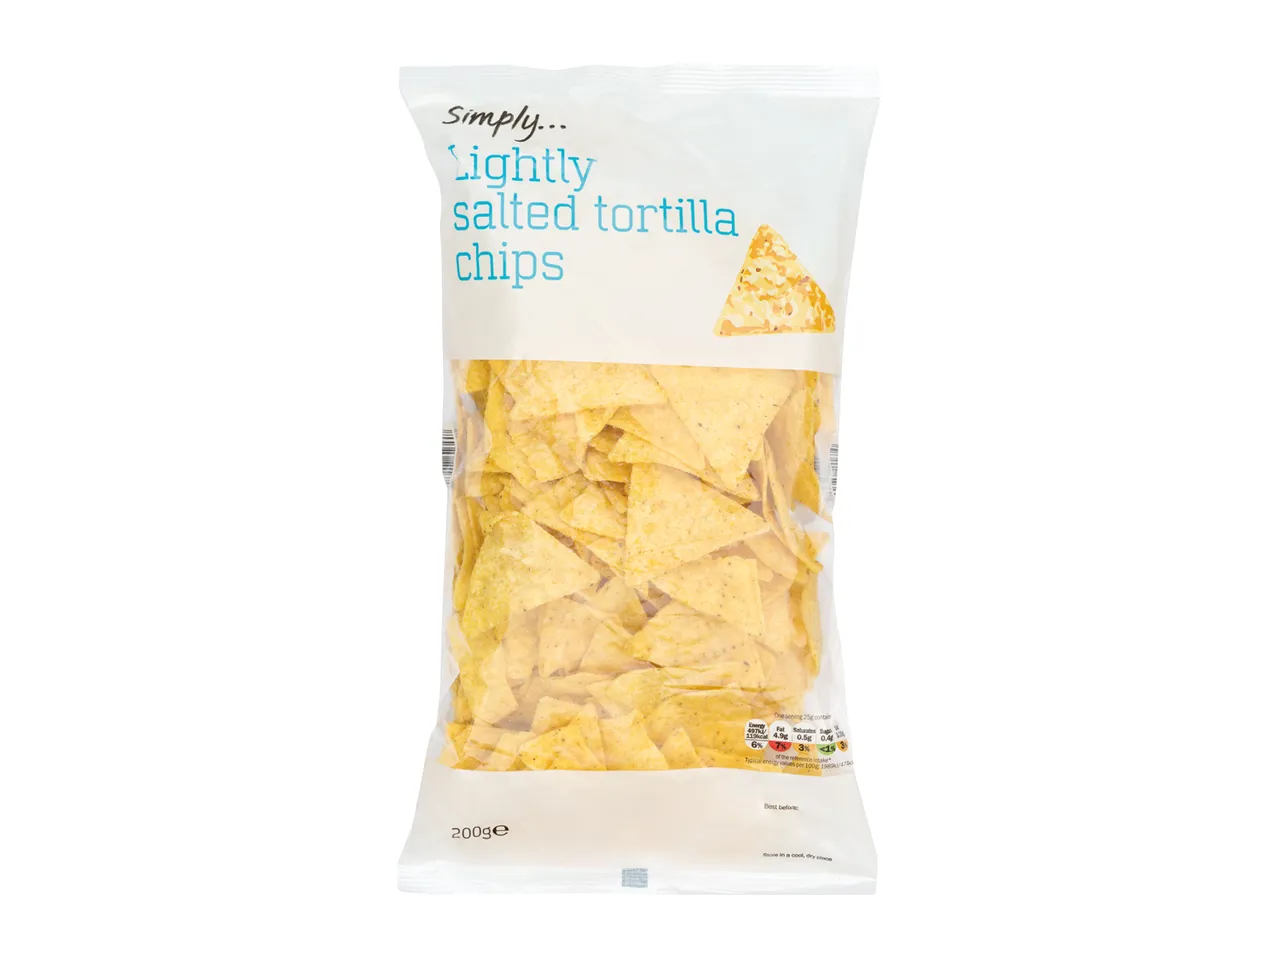 Go to full screen view: Simply Tortilla Chips Lightly Salted - Image 1